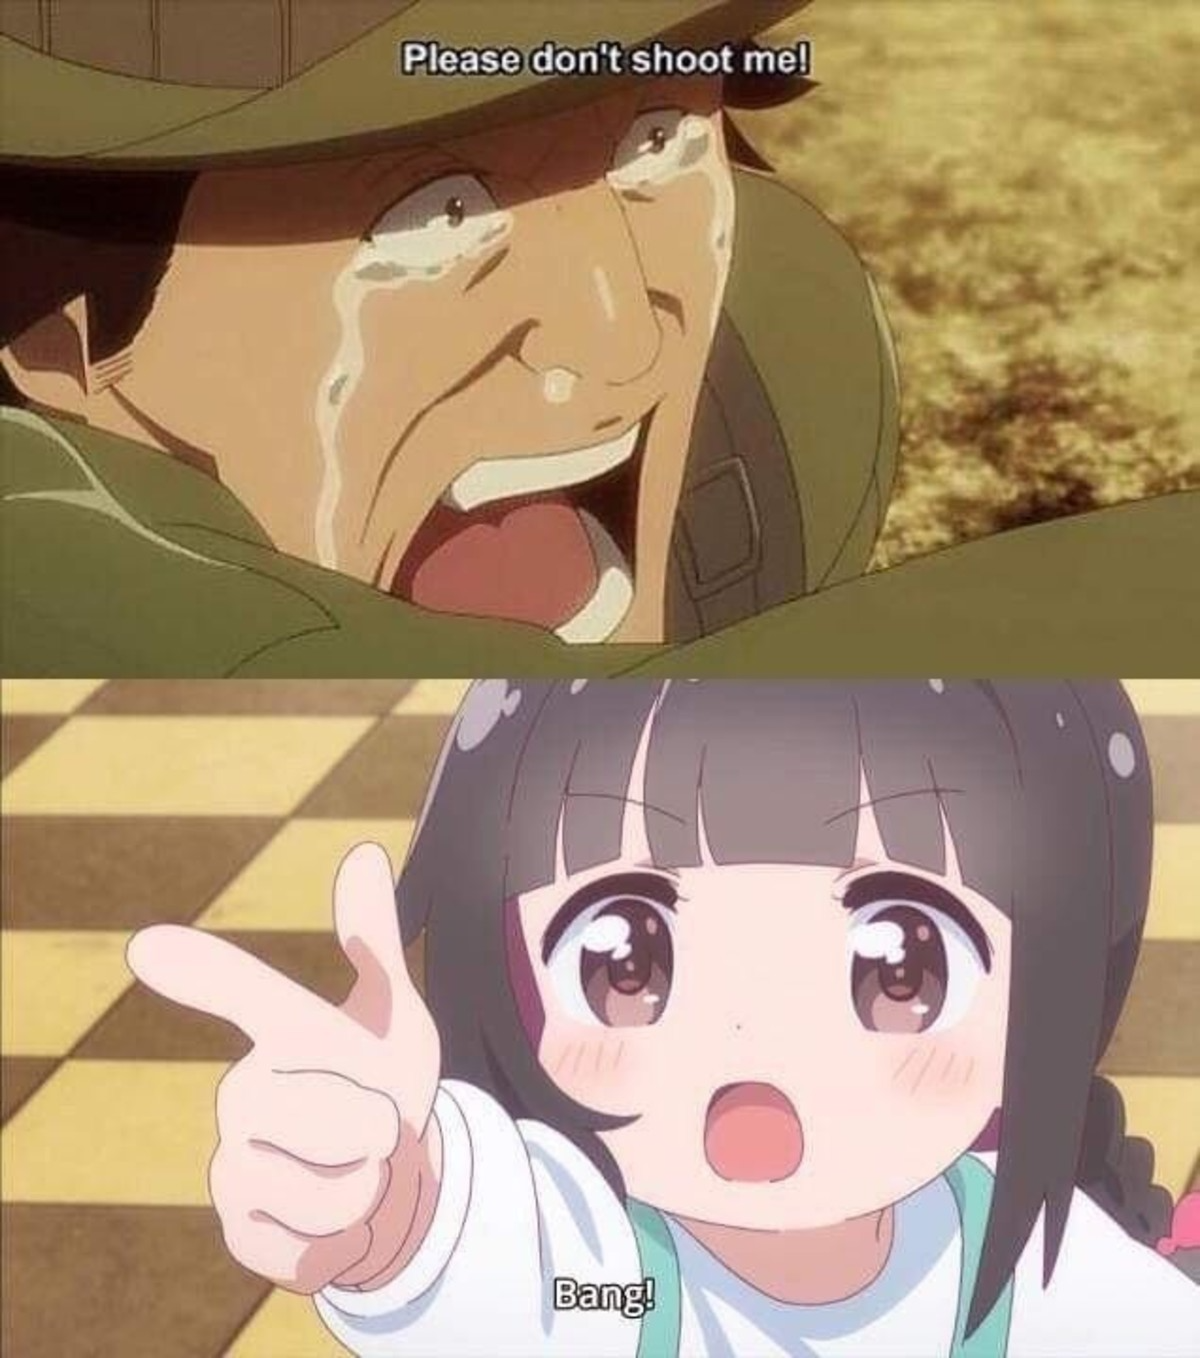 No "Cute Anime Girl Finger-Gun" memes have been featured yet. 